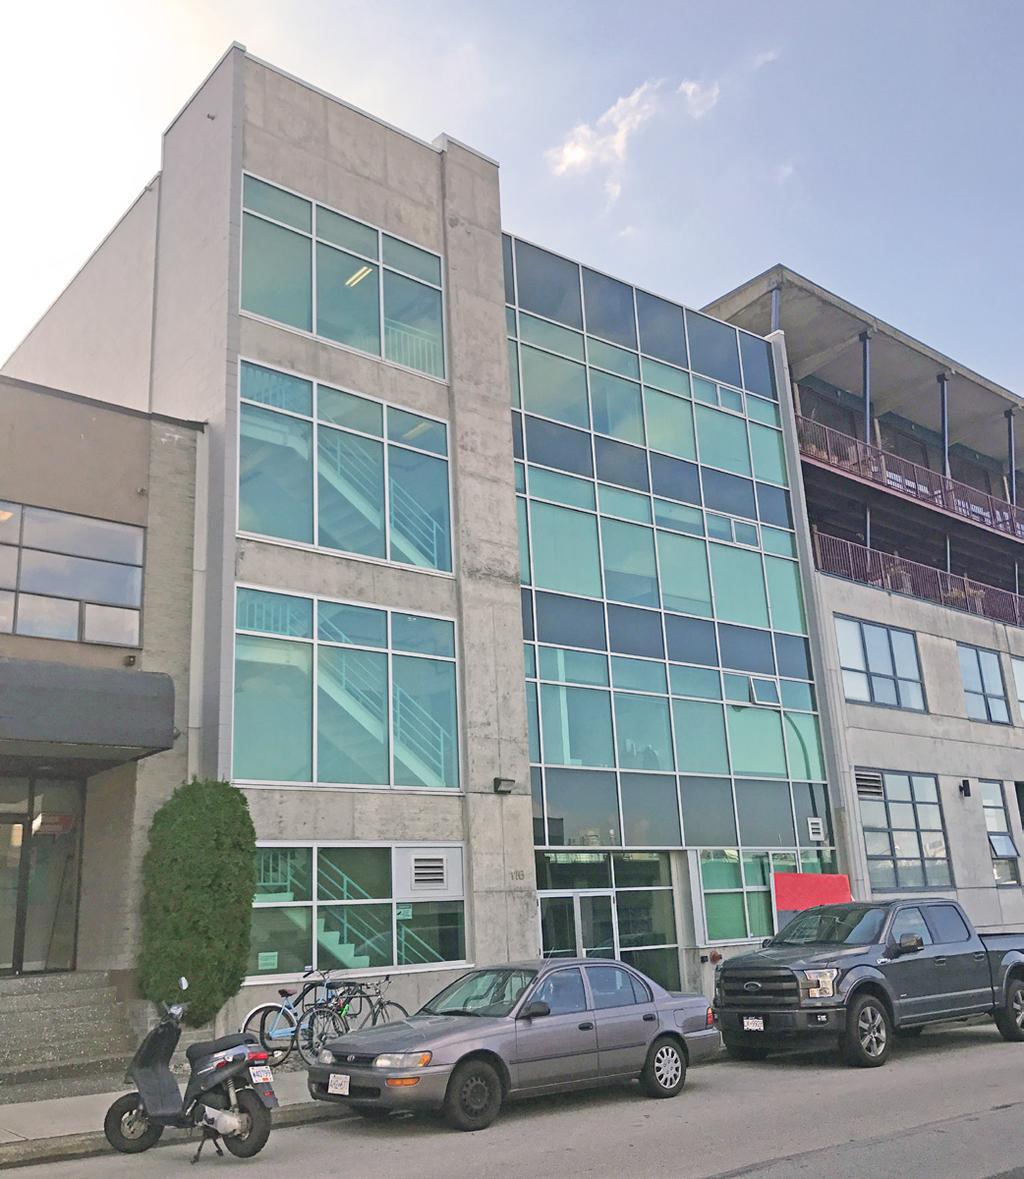 WEST TH AVENUE LOCATION OVERVIEW Located in the heart of Mount Pleasant, West th Avenue presents a rare opportunity to acquire or occupy a move-in ready freestanding office building in one Vancouver